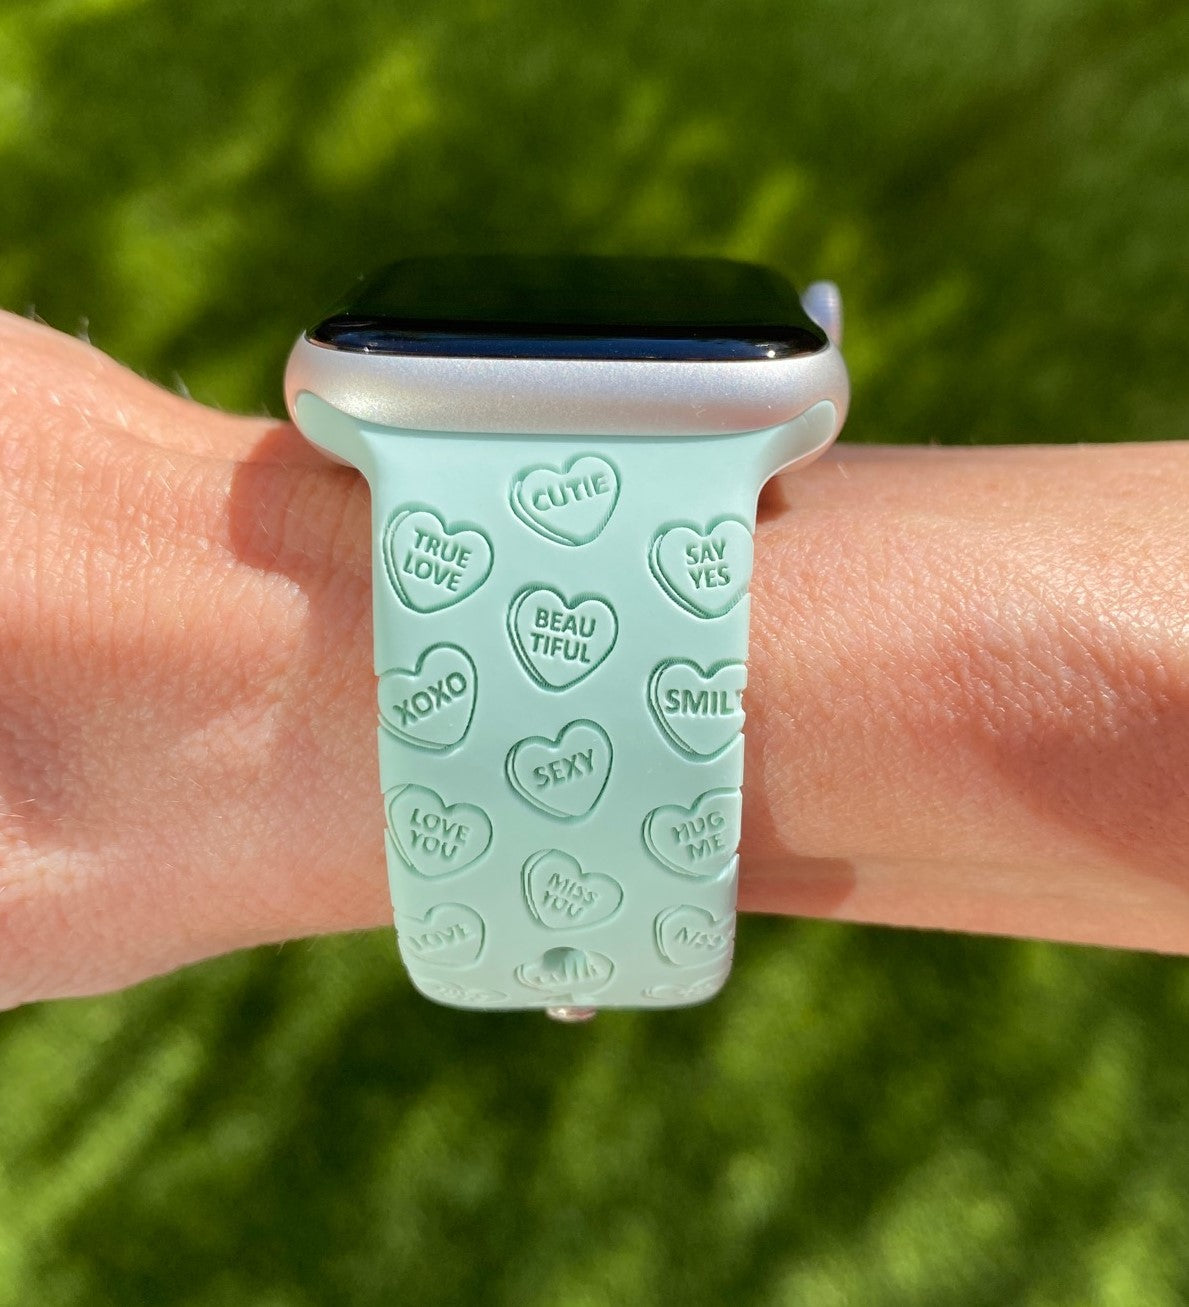 Candy Hearts Valentine's Day Apple Watch Band